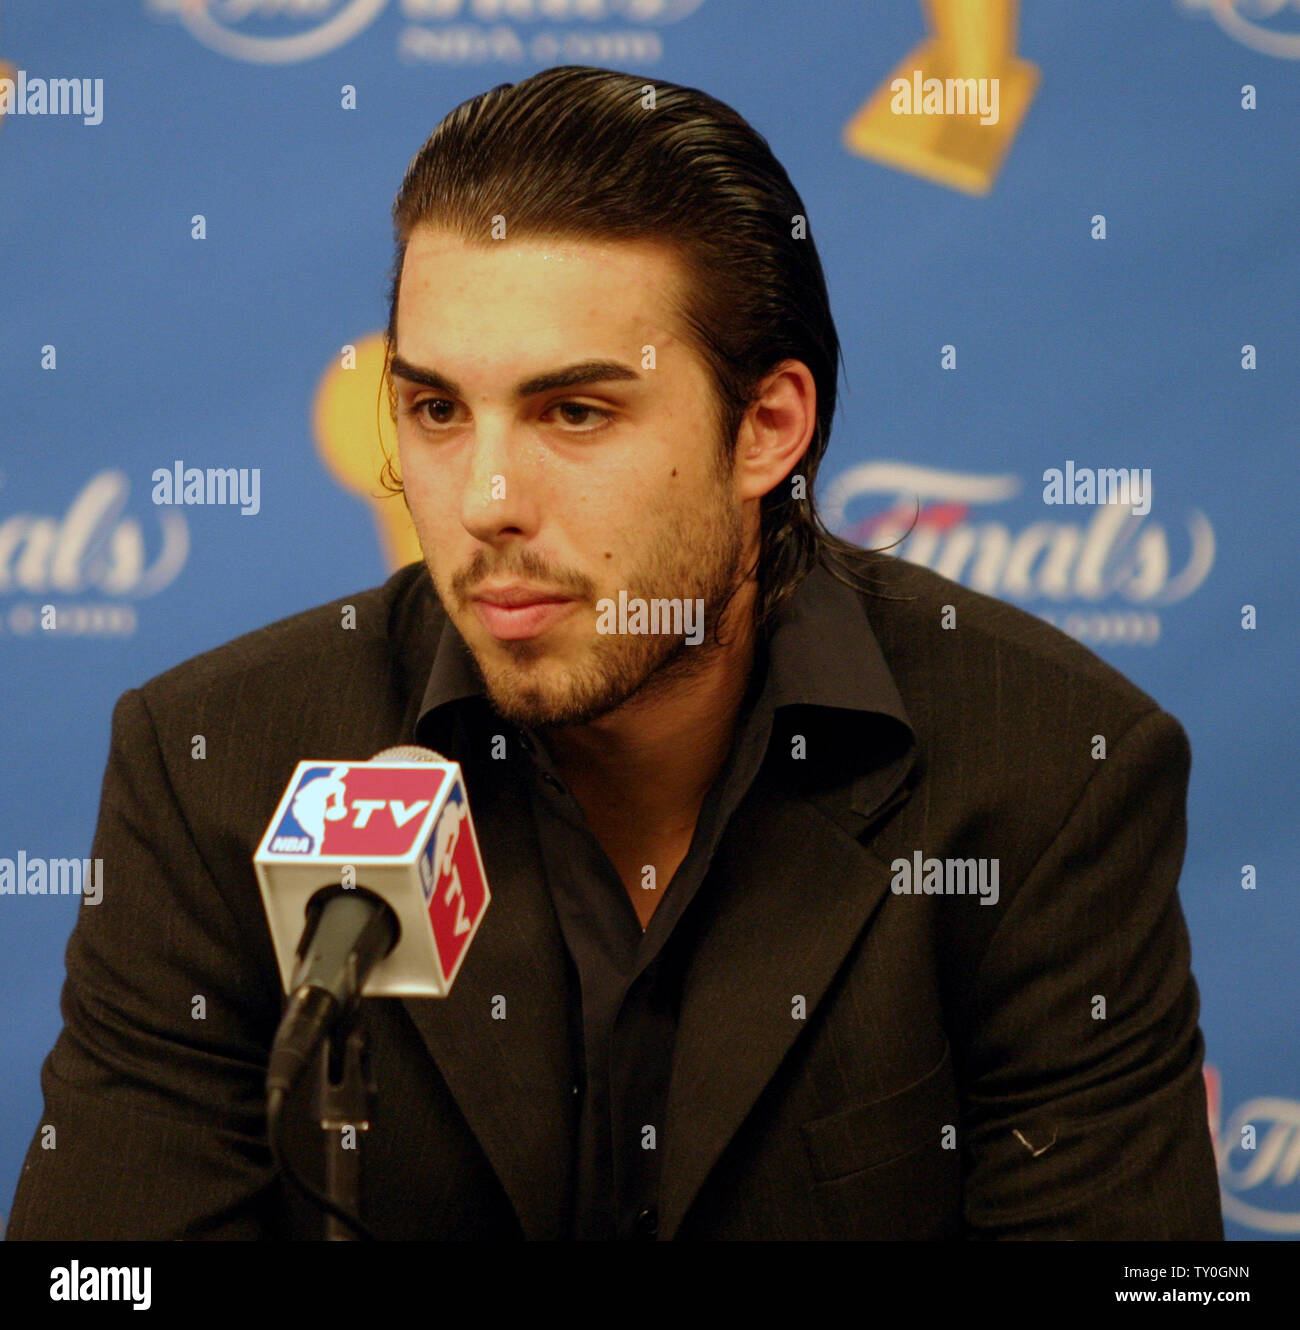 Los Angeles Lakers' Sasha Vujacic speaks with reporters during a post-game news conference following Game 3 of the NBA finals at Staples Center in Los Angeles on June 10, 2008. The Lakers defeated the Boston Celtics 87-81 to stave off a 3-0 hole in the best-of-seven series. The Celtics lead the series 2-1.  (UPI Photo/Lazlo Fitz) Stock Photo